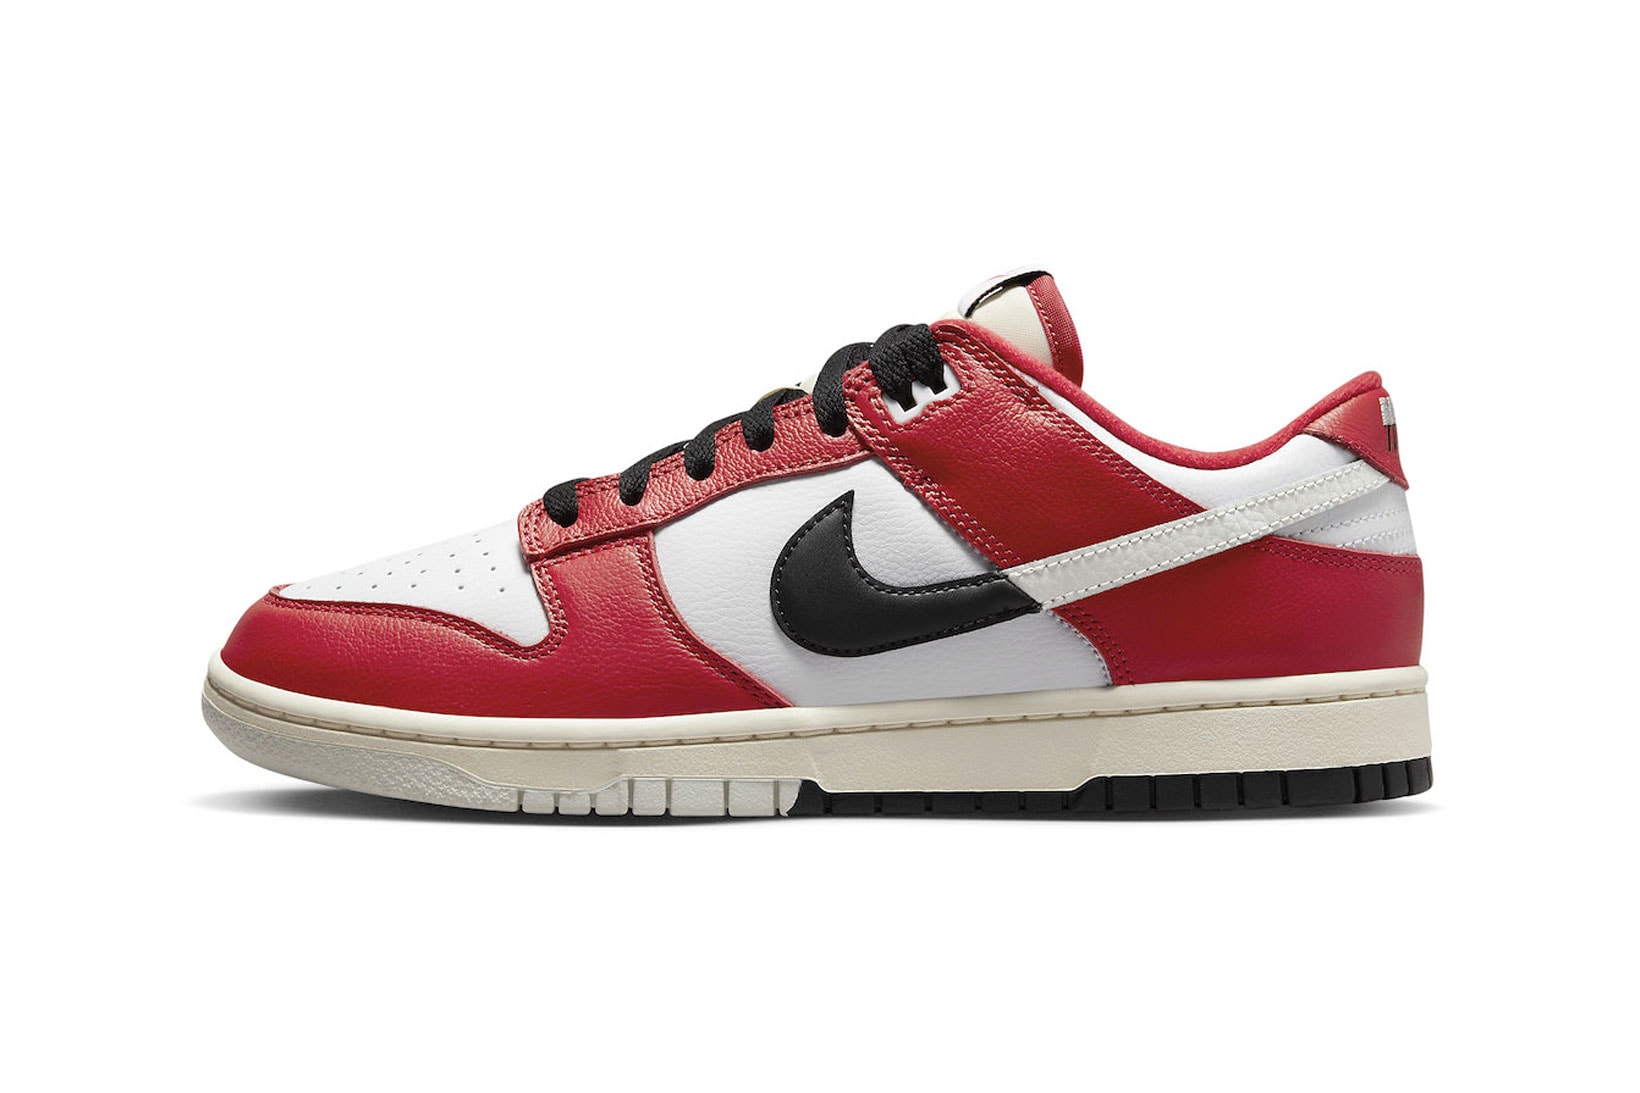 Nike Dunk Low Chicago Split Red Black White Official Images Release Date Info